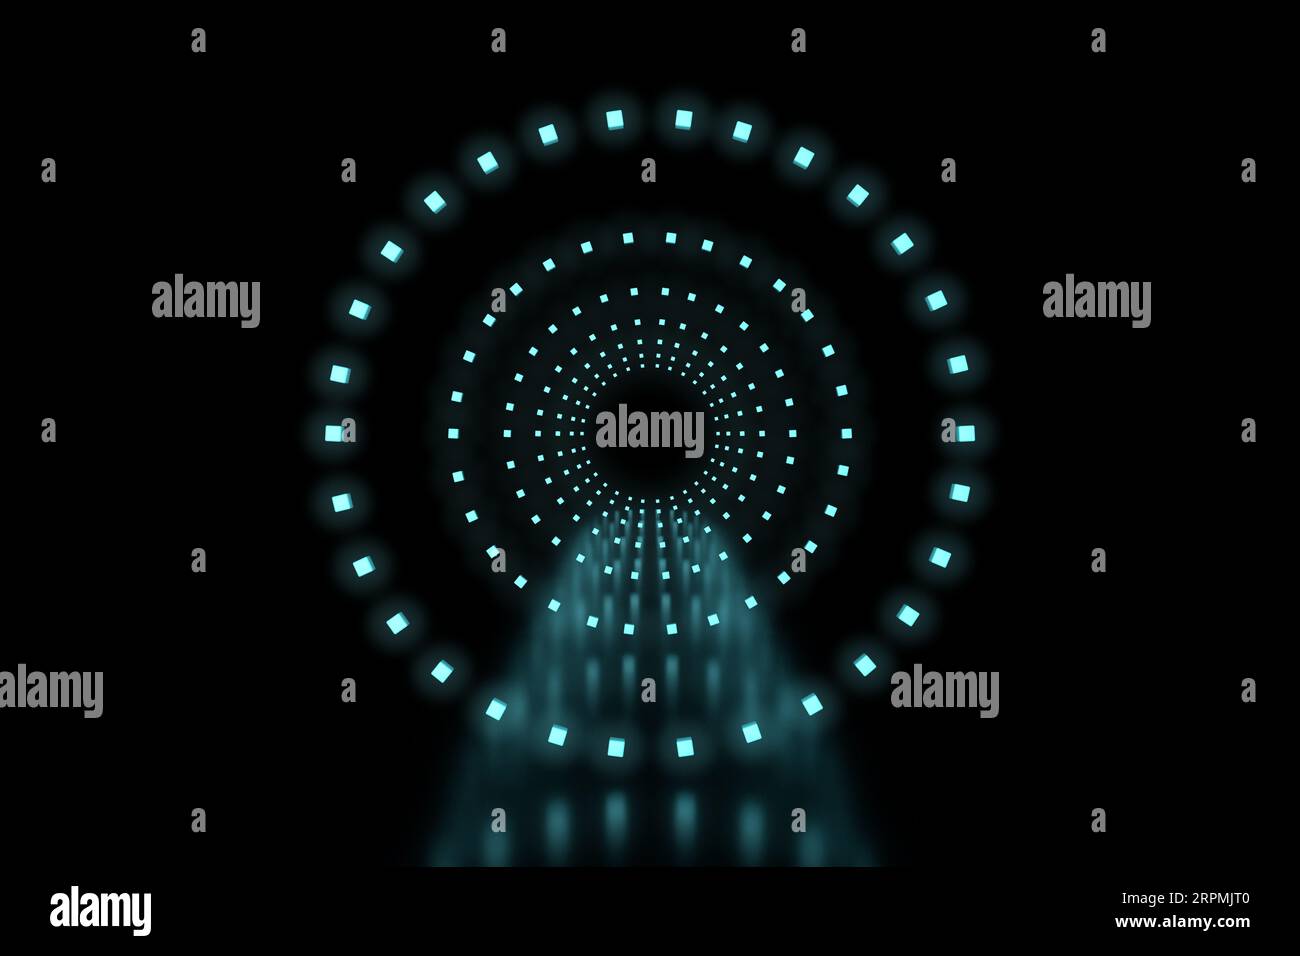 Close-up on a row of circle shaped blue LED lights. Stock Photo